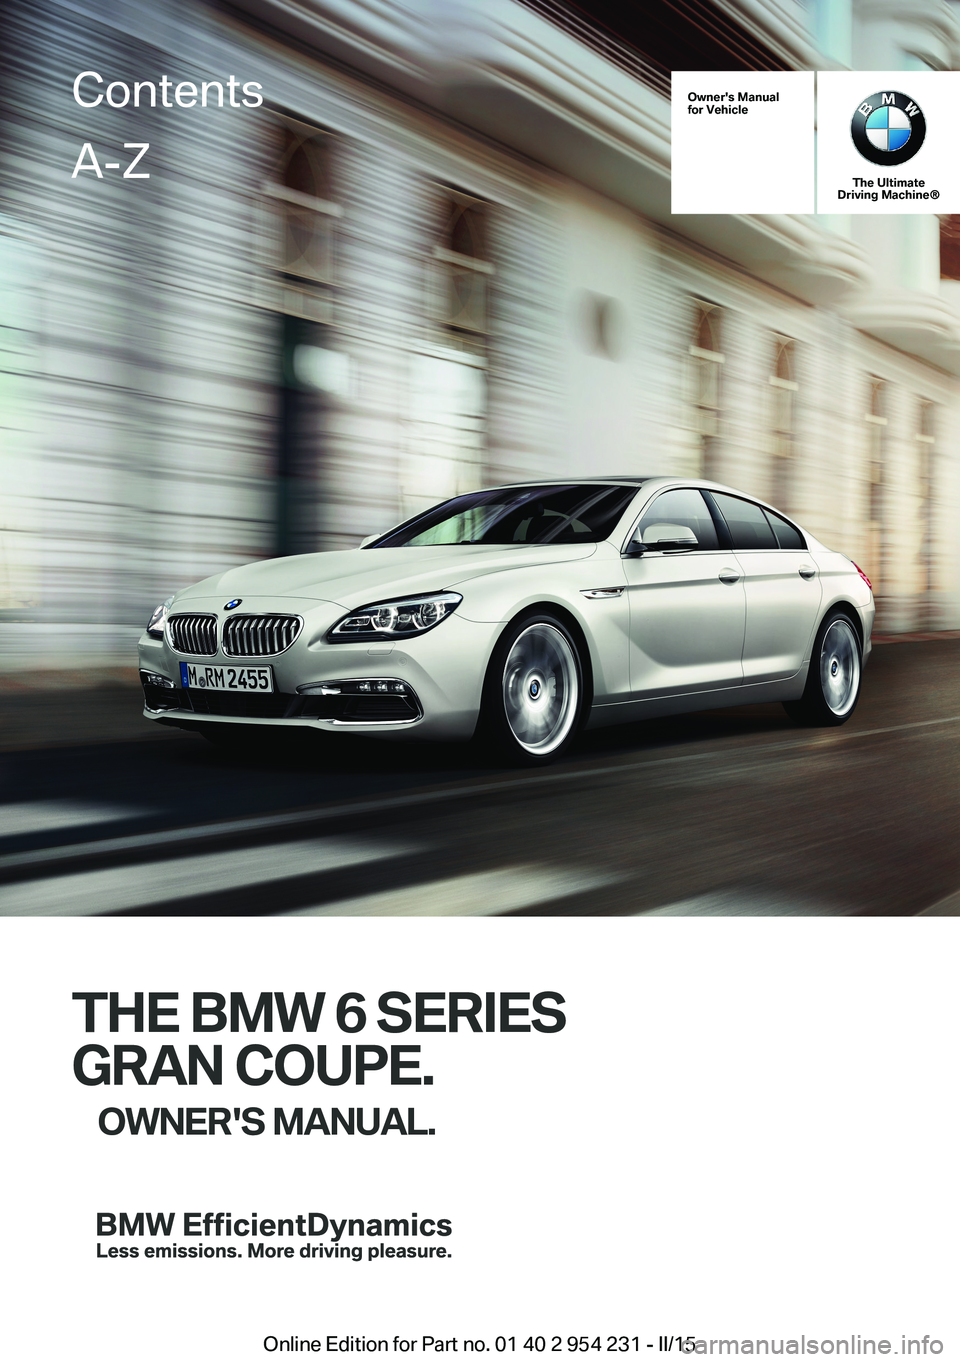 BMW 640I GRAN COUPE 2016  Owners Manual Owner's Manualfor Vehicle
The UltimateDriving Machine®
THE BMW 6 SERIES
GRAN COUPE.
OWNER'S MANUAL.
ContentsA-Z
Online Edition for Part no. 01 40 2 954 231 - II/15   